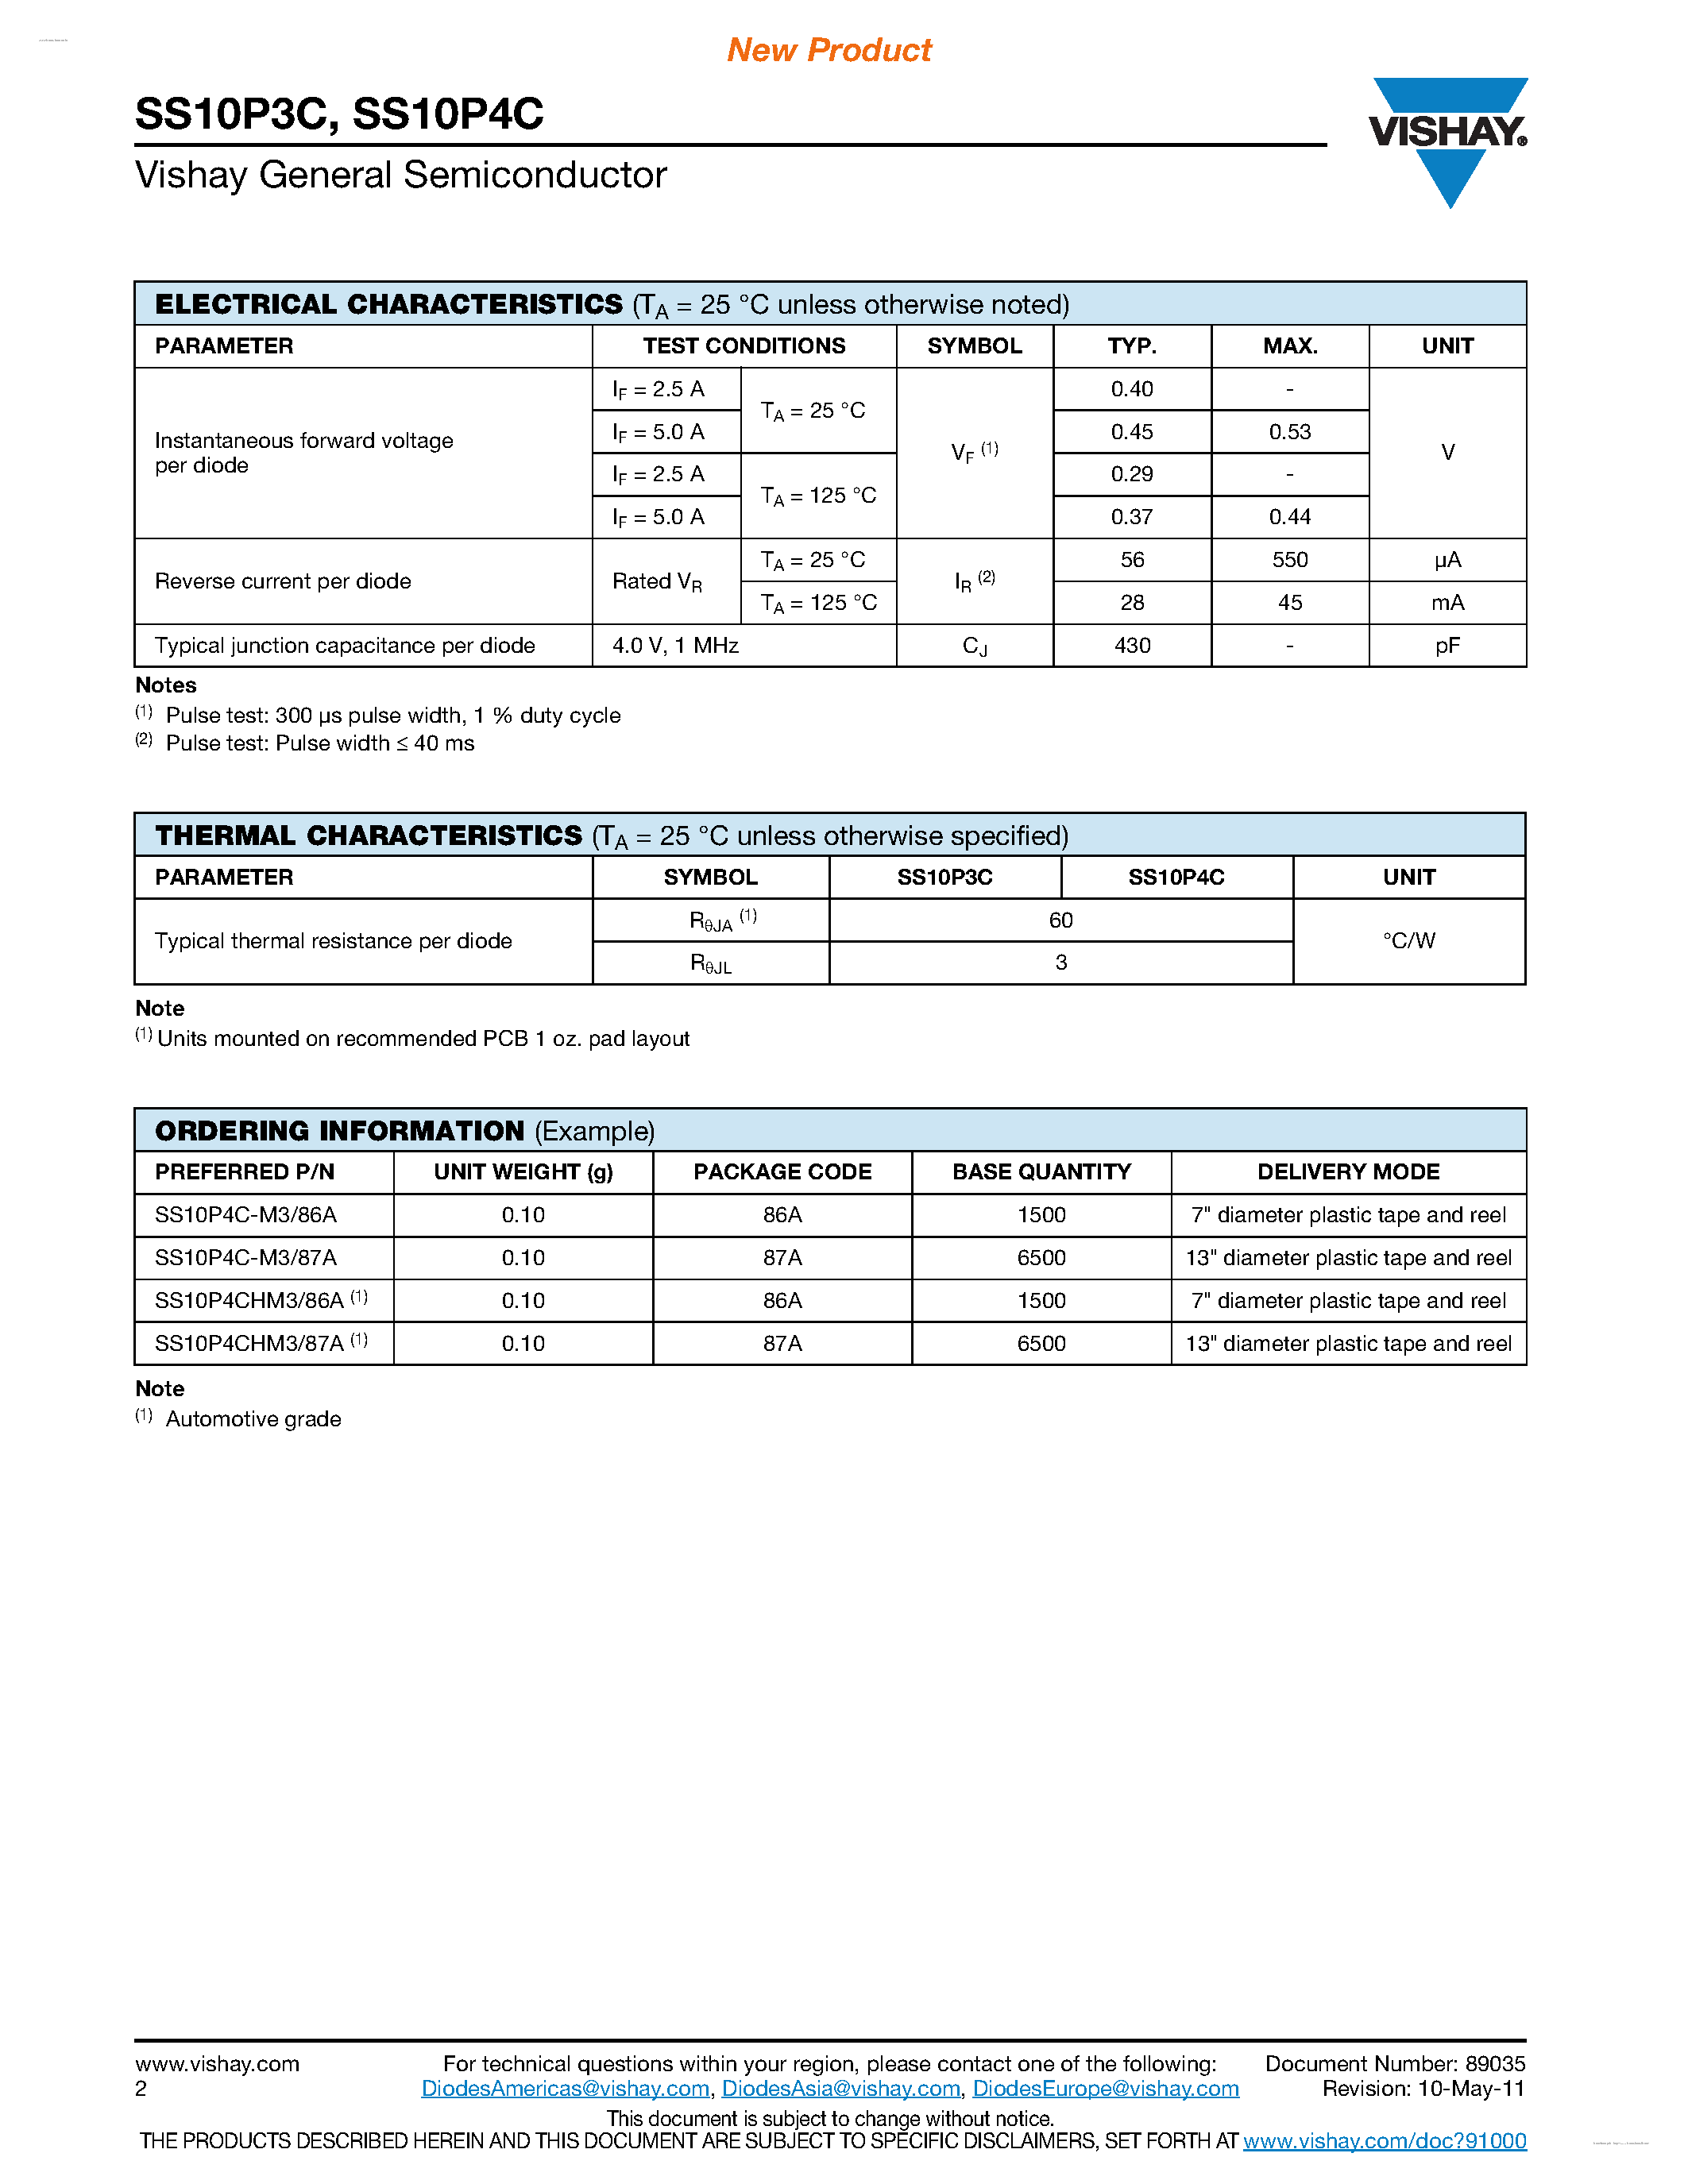 Datasheet SS10P3C - (SS10P3C / SS10P4C) High Current Density Surface Mount Schottky Barrier Rectifiers page 2